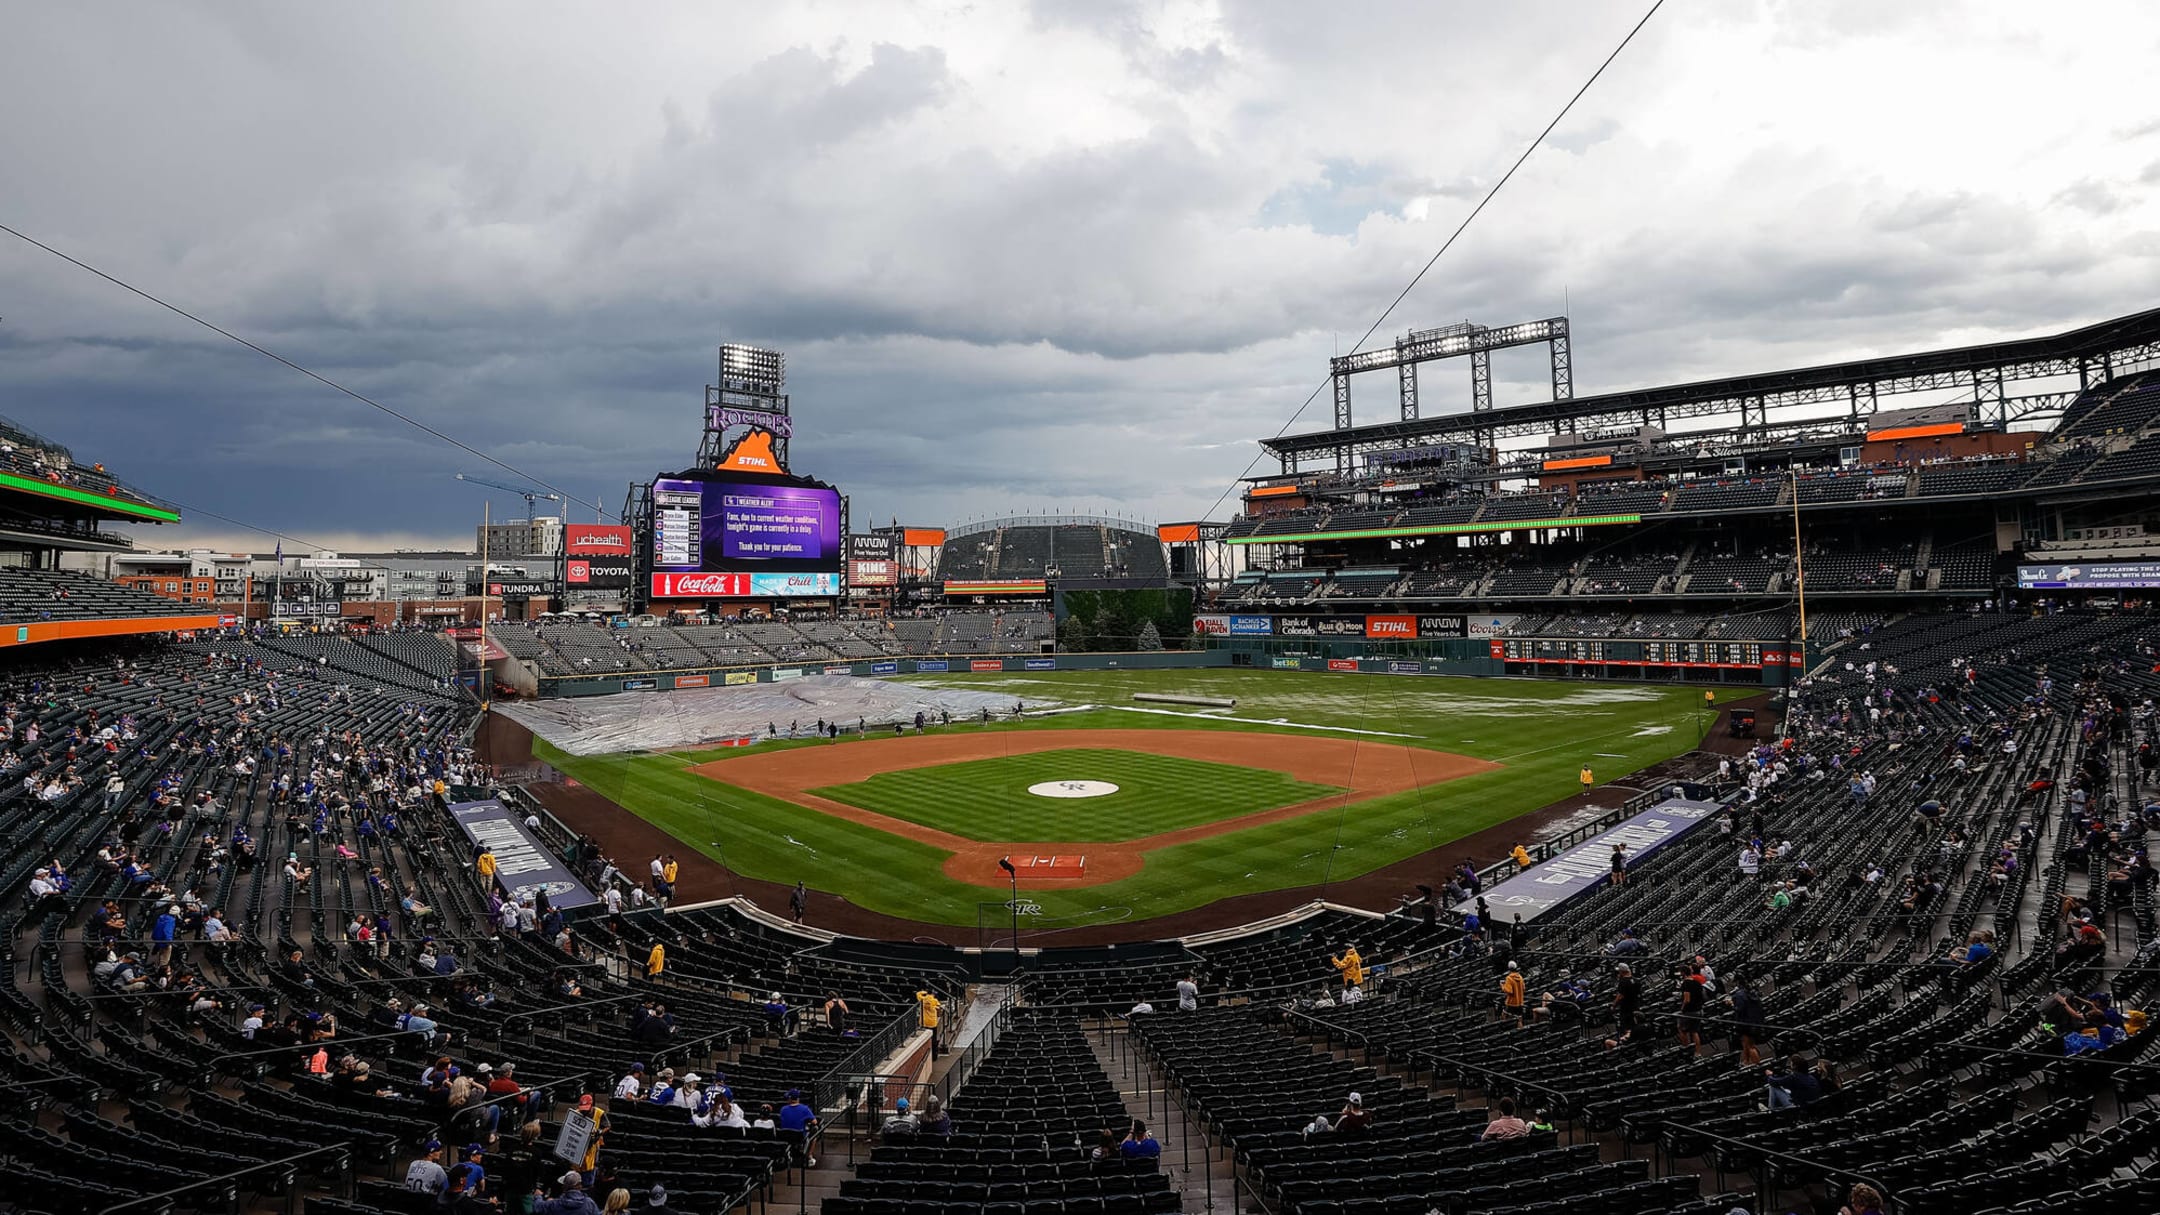 Rockies dugout filled with 'almost two feet' of hail before game